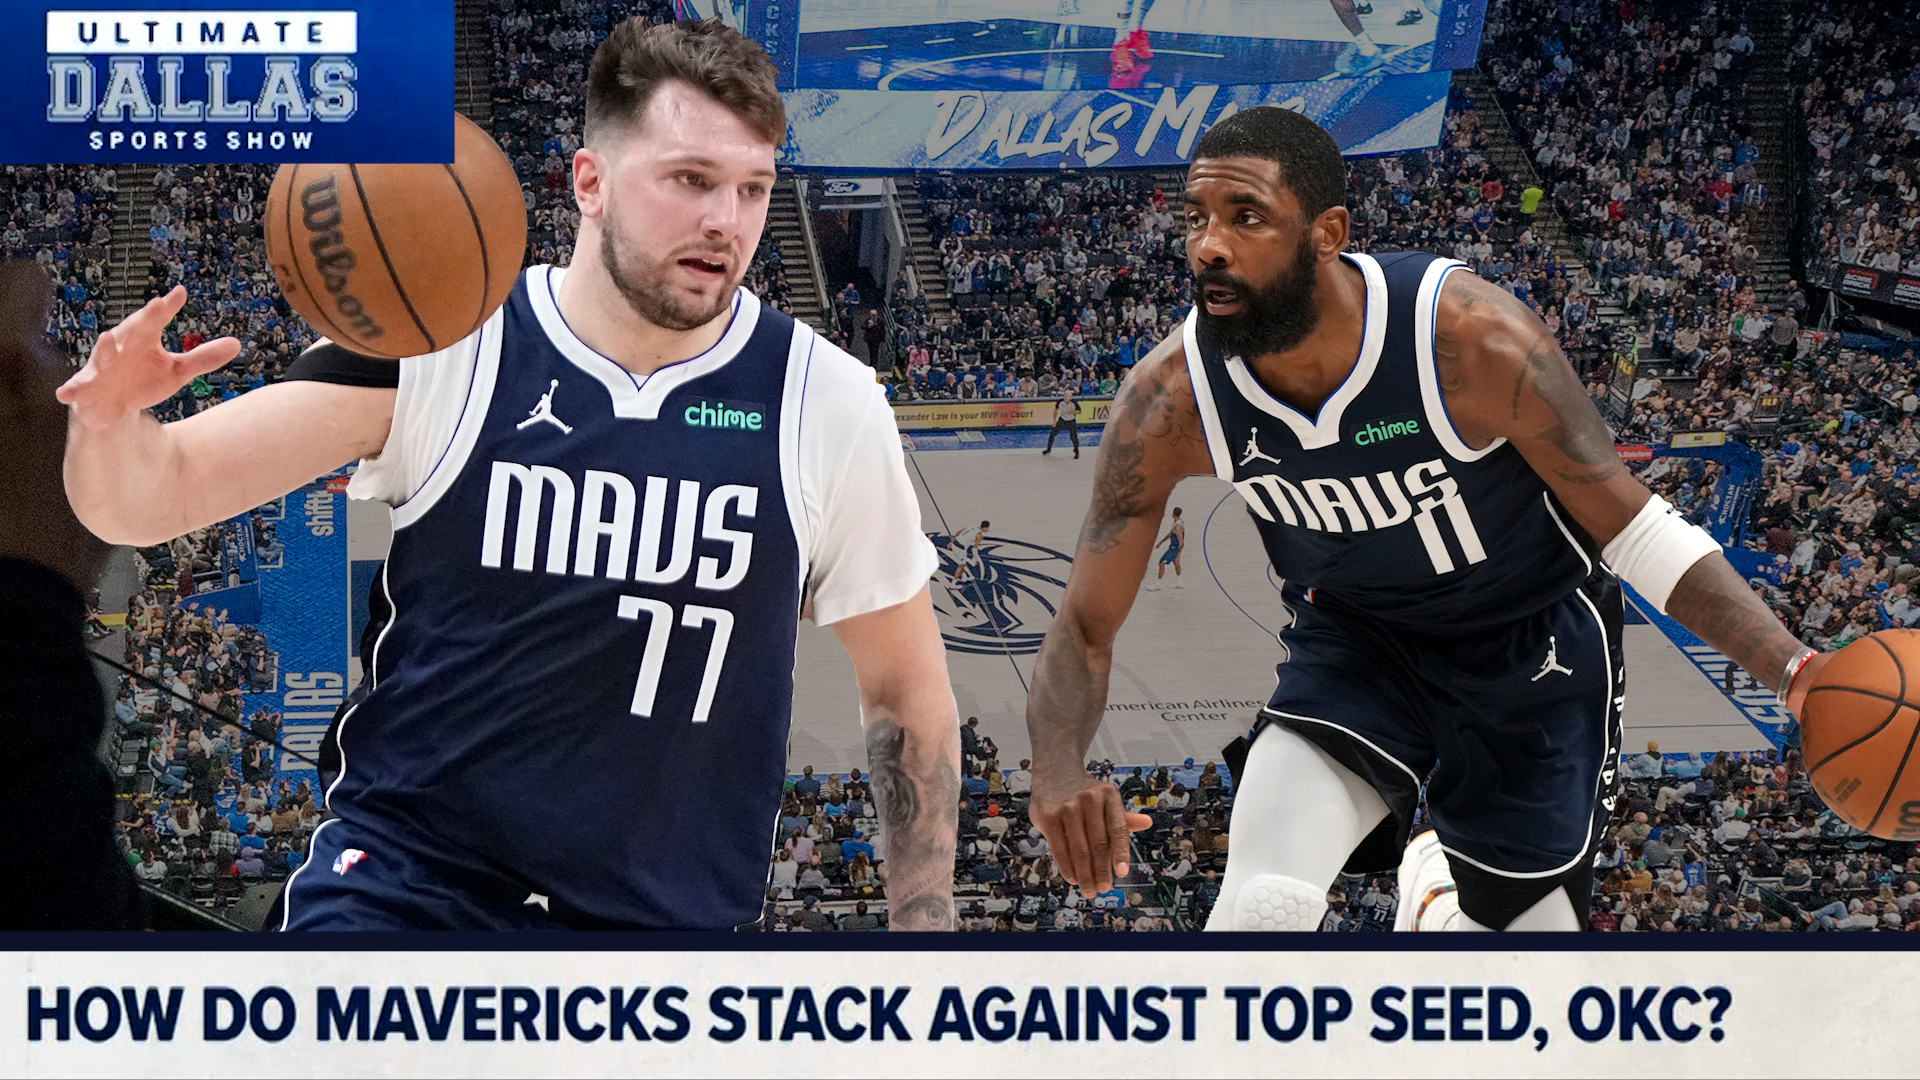 Luka Doncic and Kyrie Irving were phenomenal in the Mavericks' first round series against the Clippers. Can they keep it up in the second round against the Thunder?